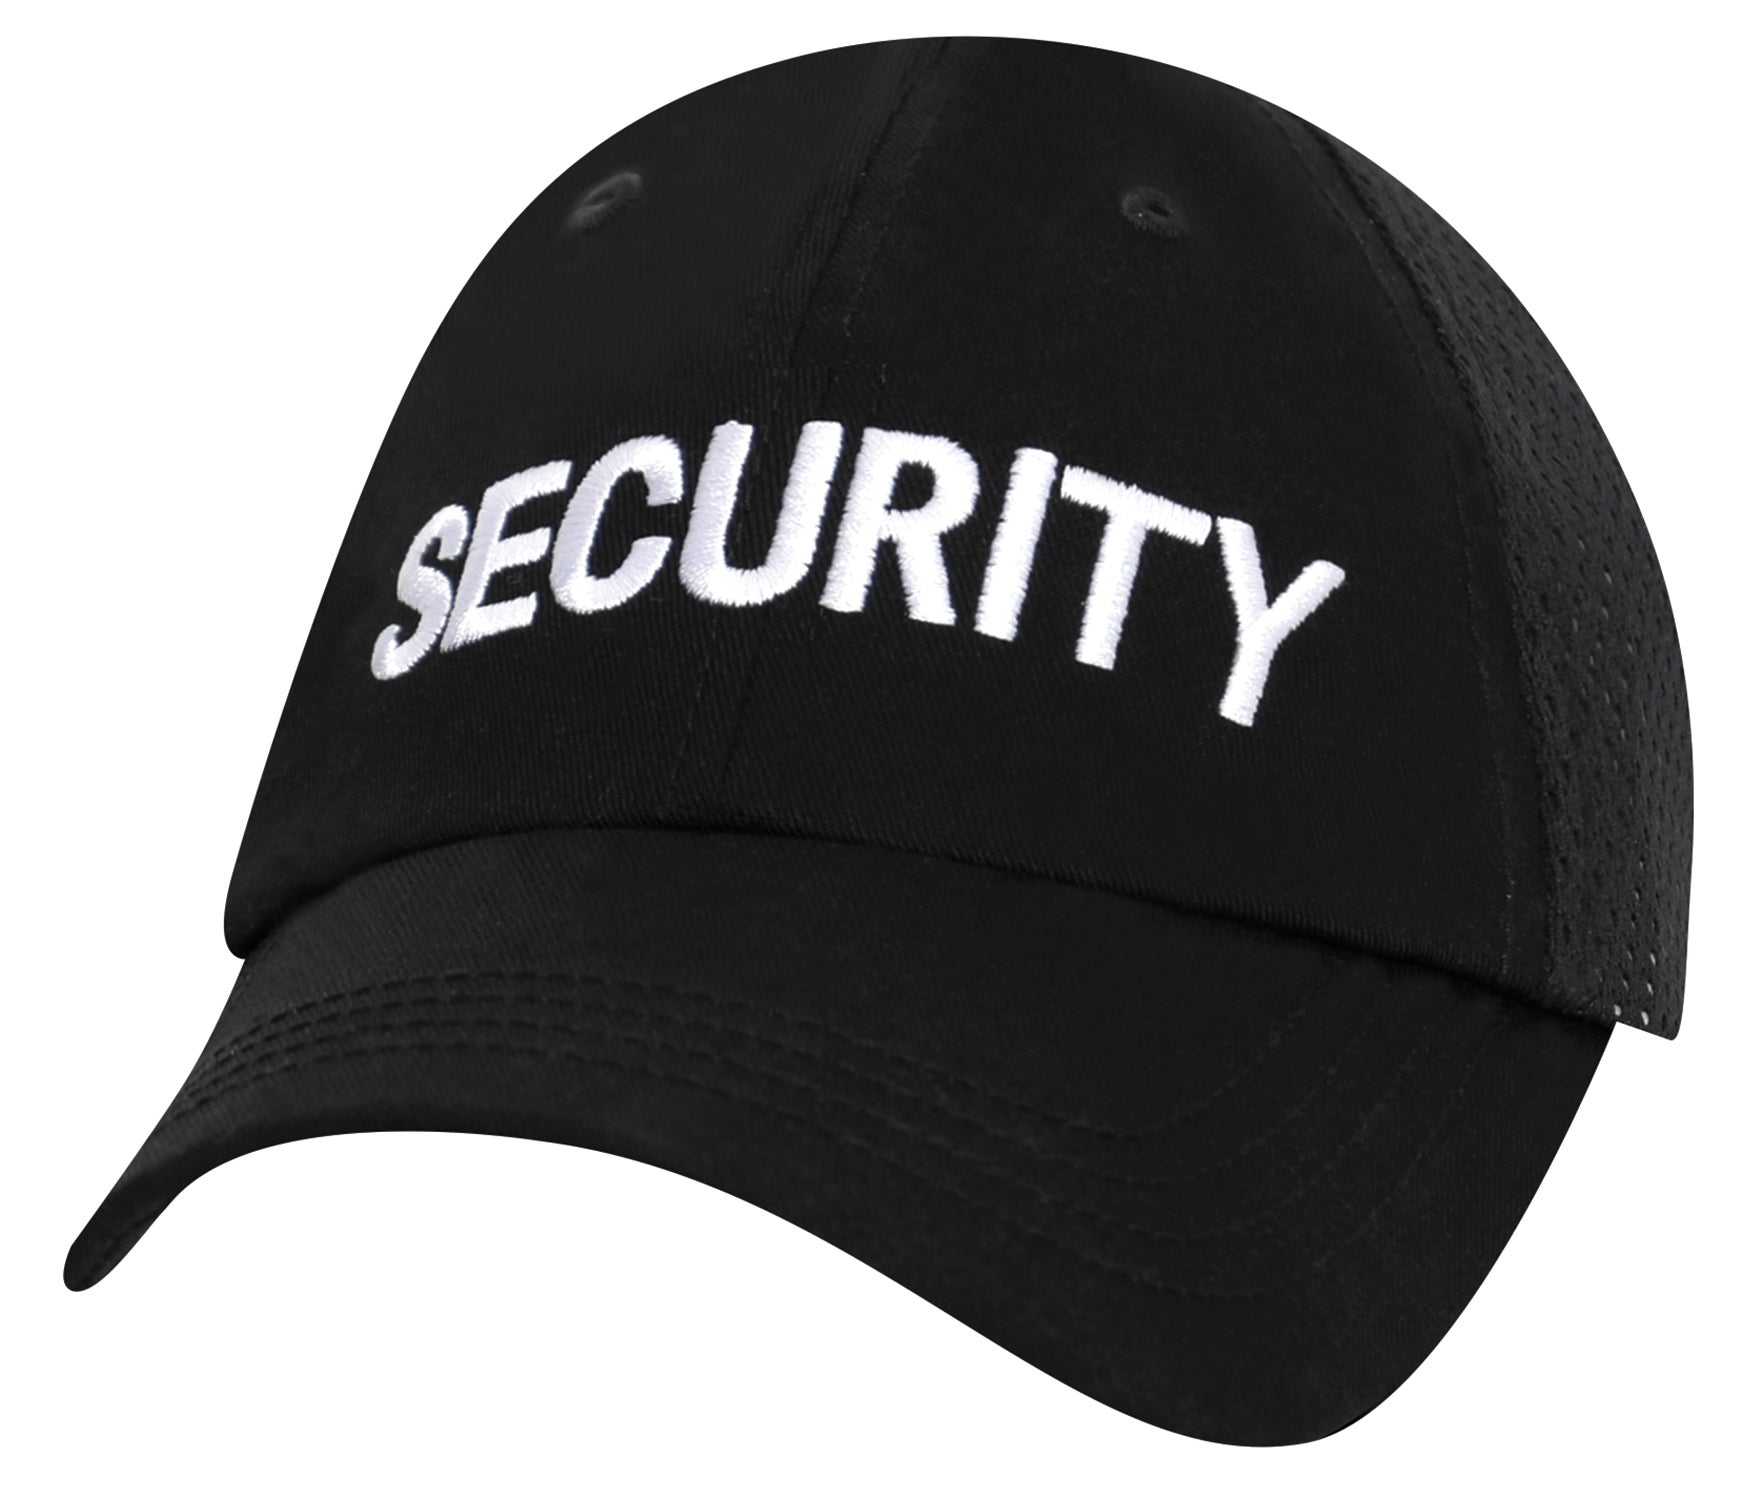 Rothco Security Mesh Back Tactical Cap